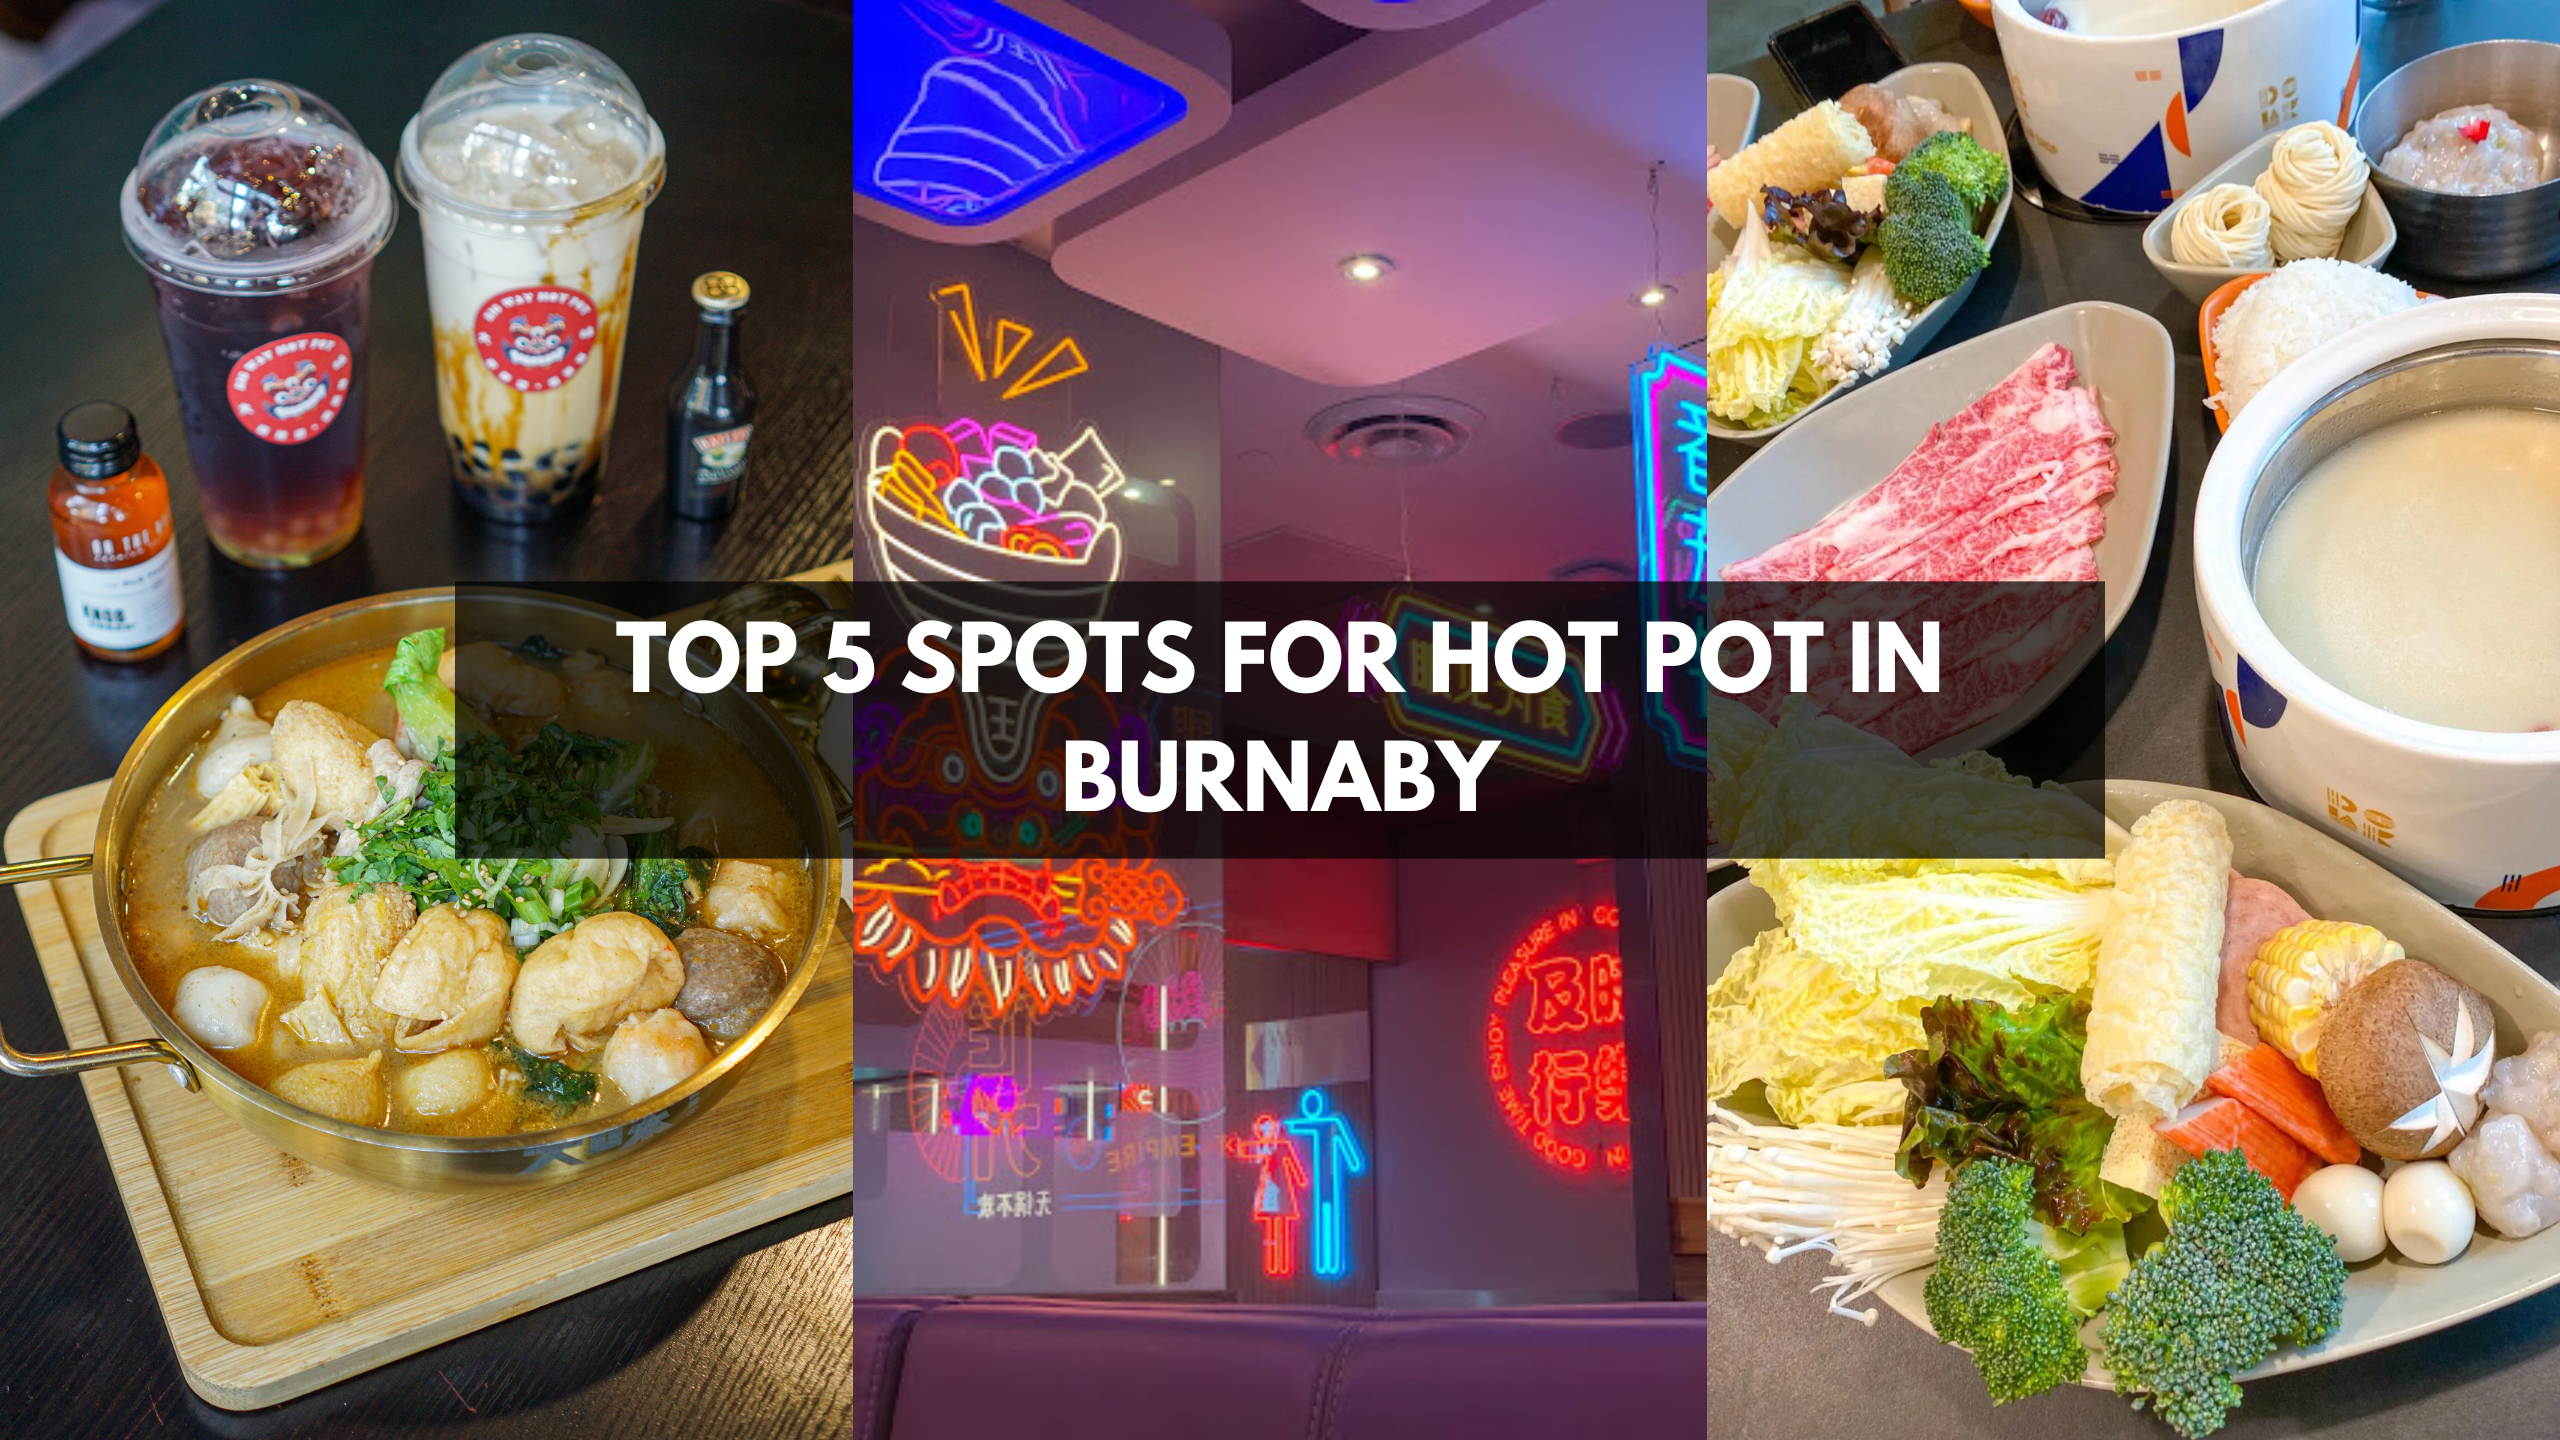 Top 5 Spots for Hot Pot in Burnaby